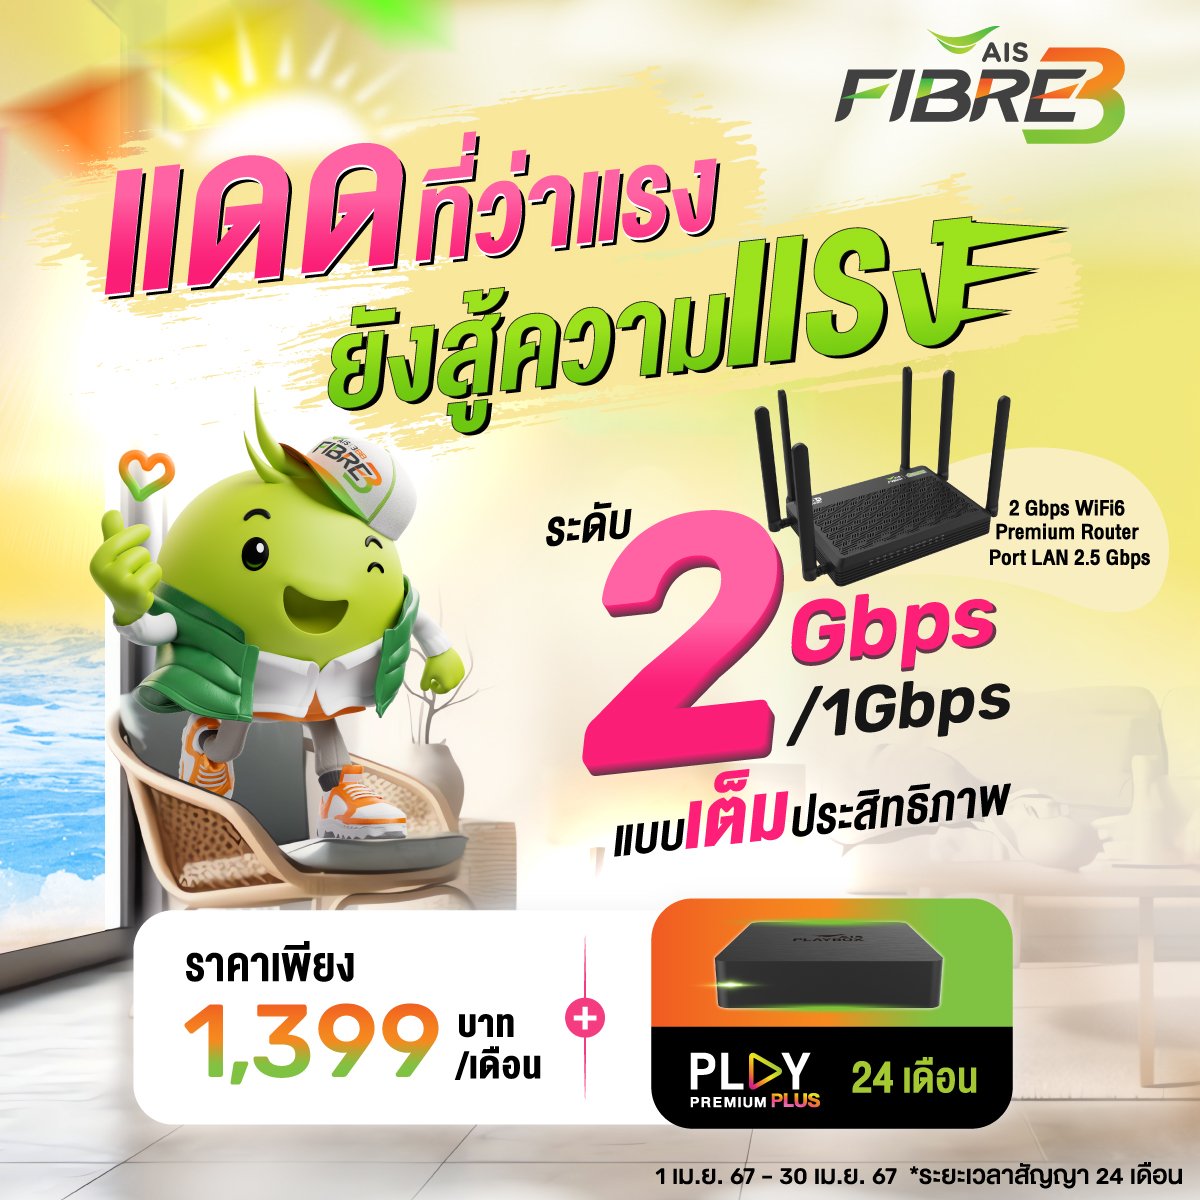 2Gbps Fibre Package